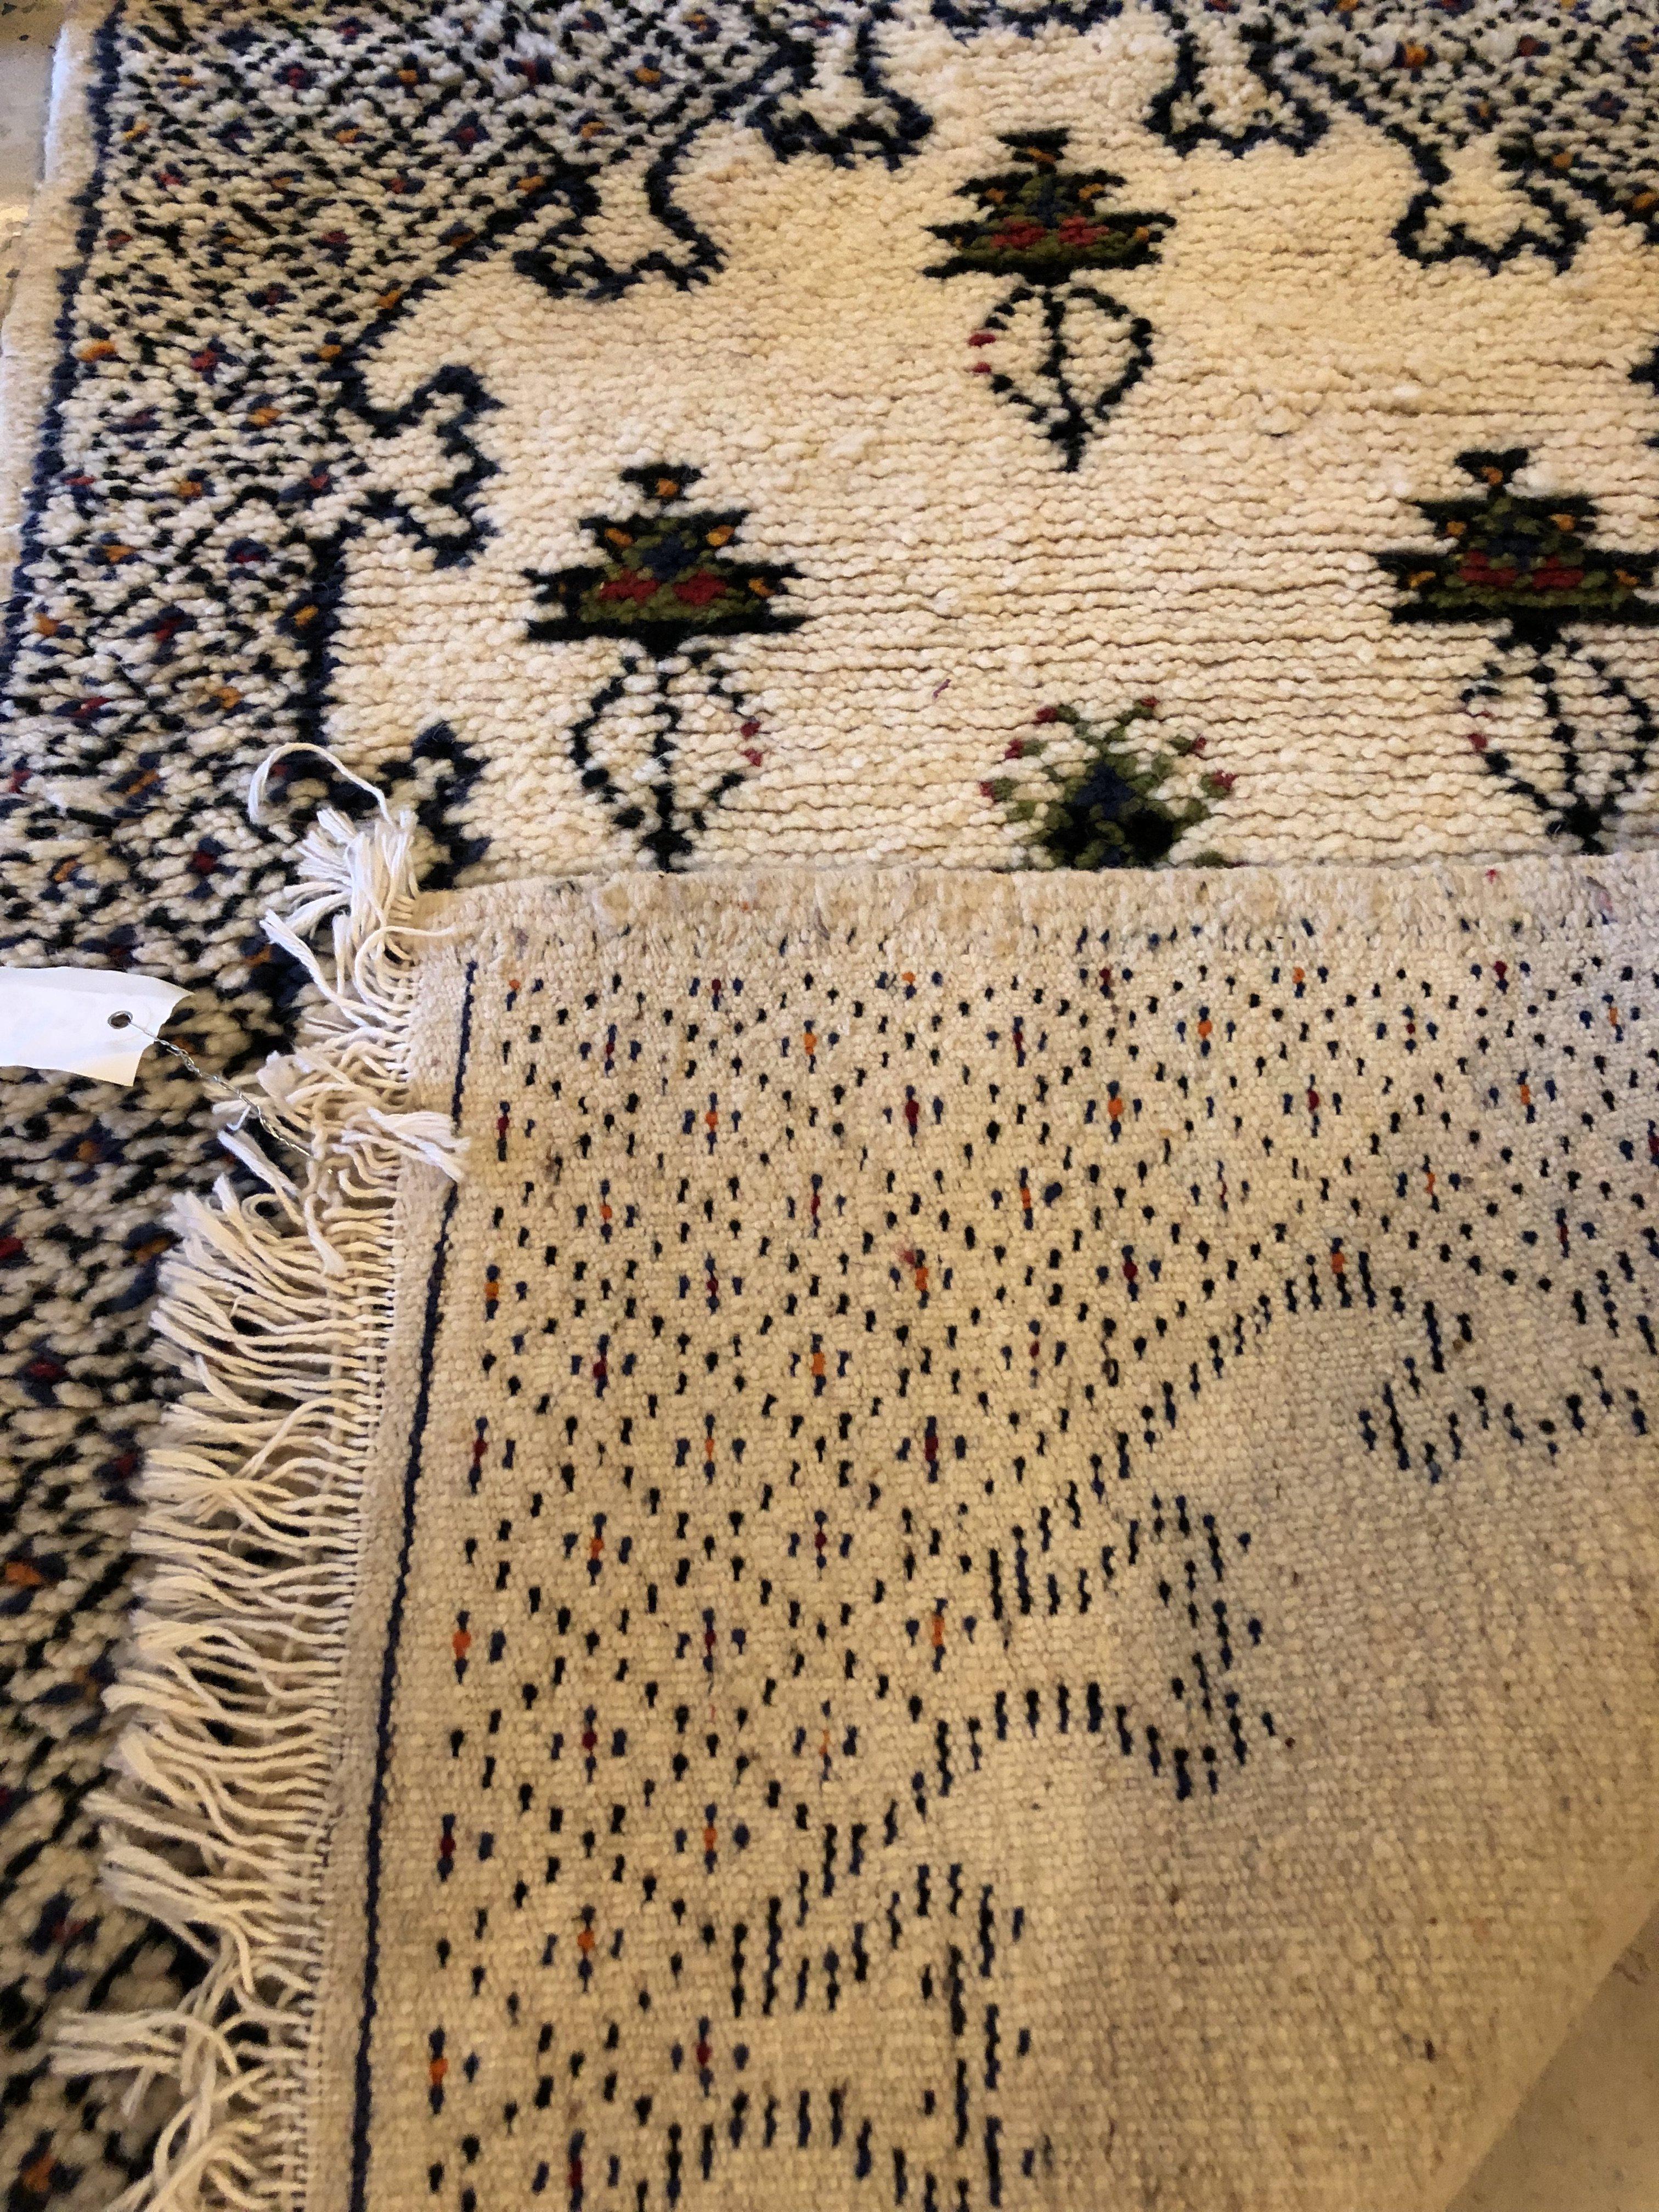 Vintage Boho Chic Tribal Moroccan Small White Wool Hand-Woven Rug or Carpet  1